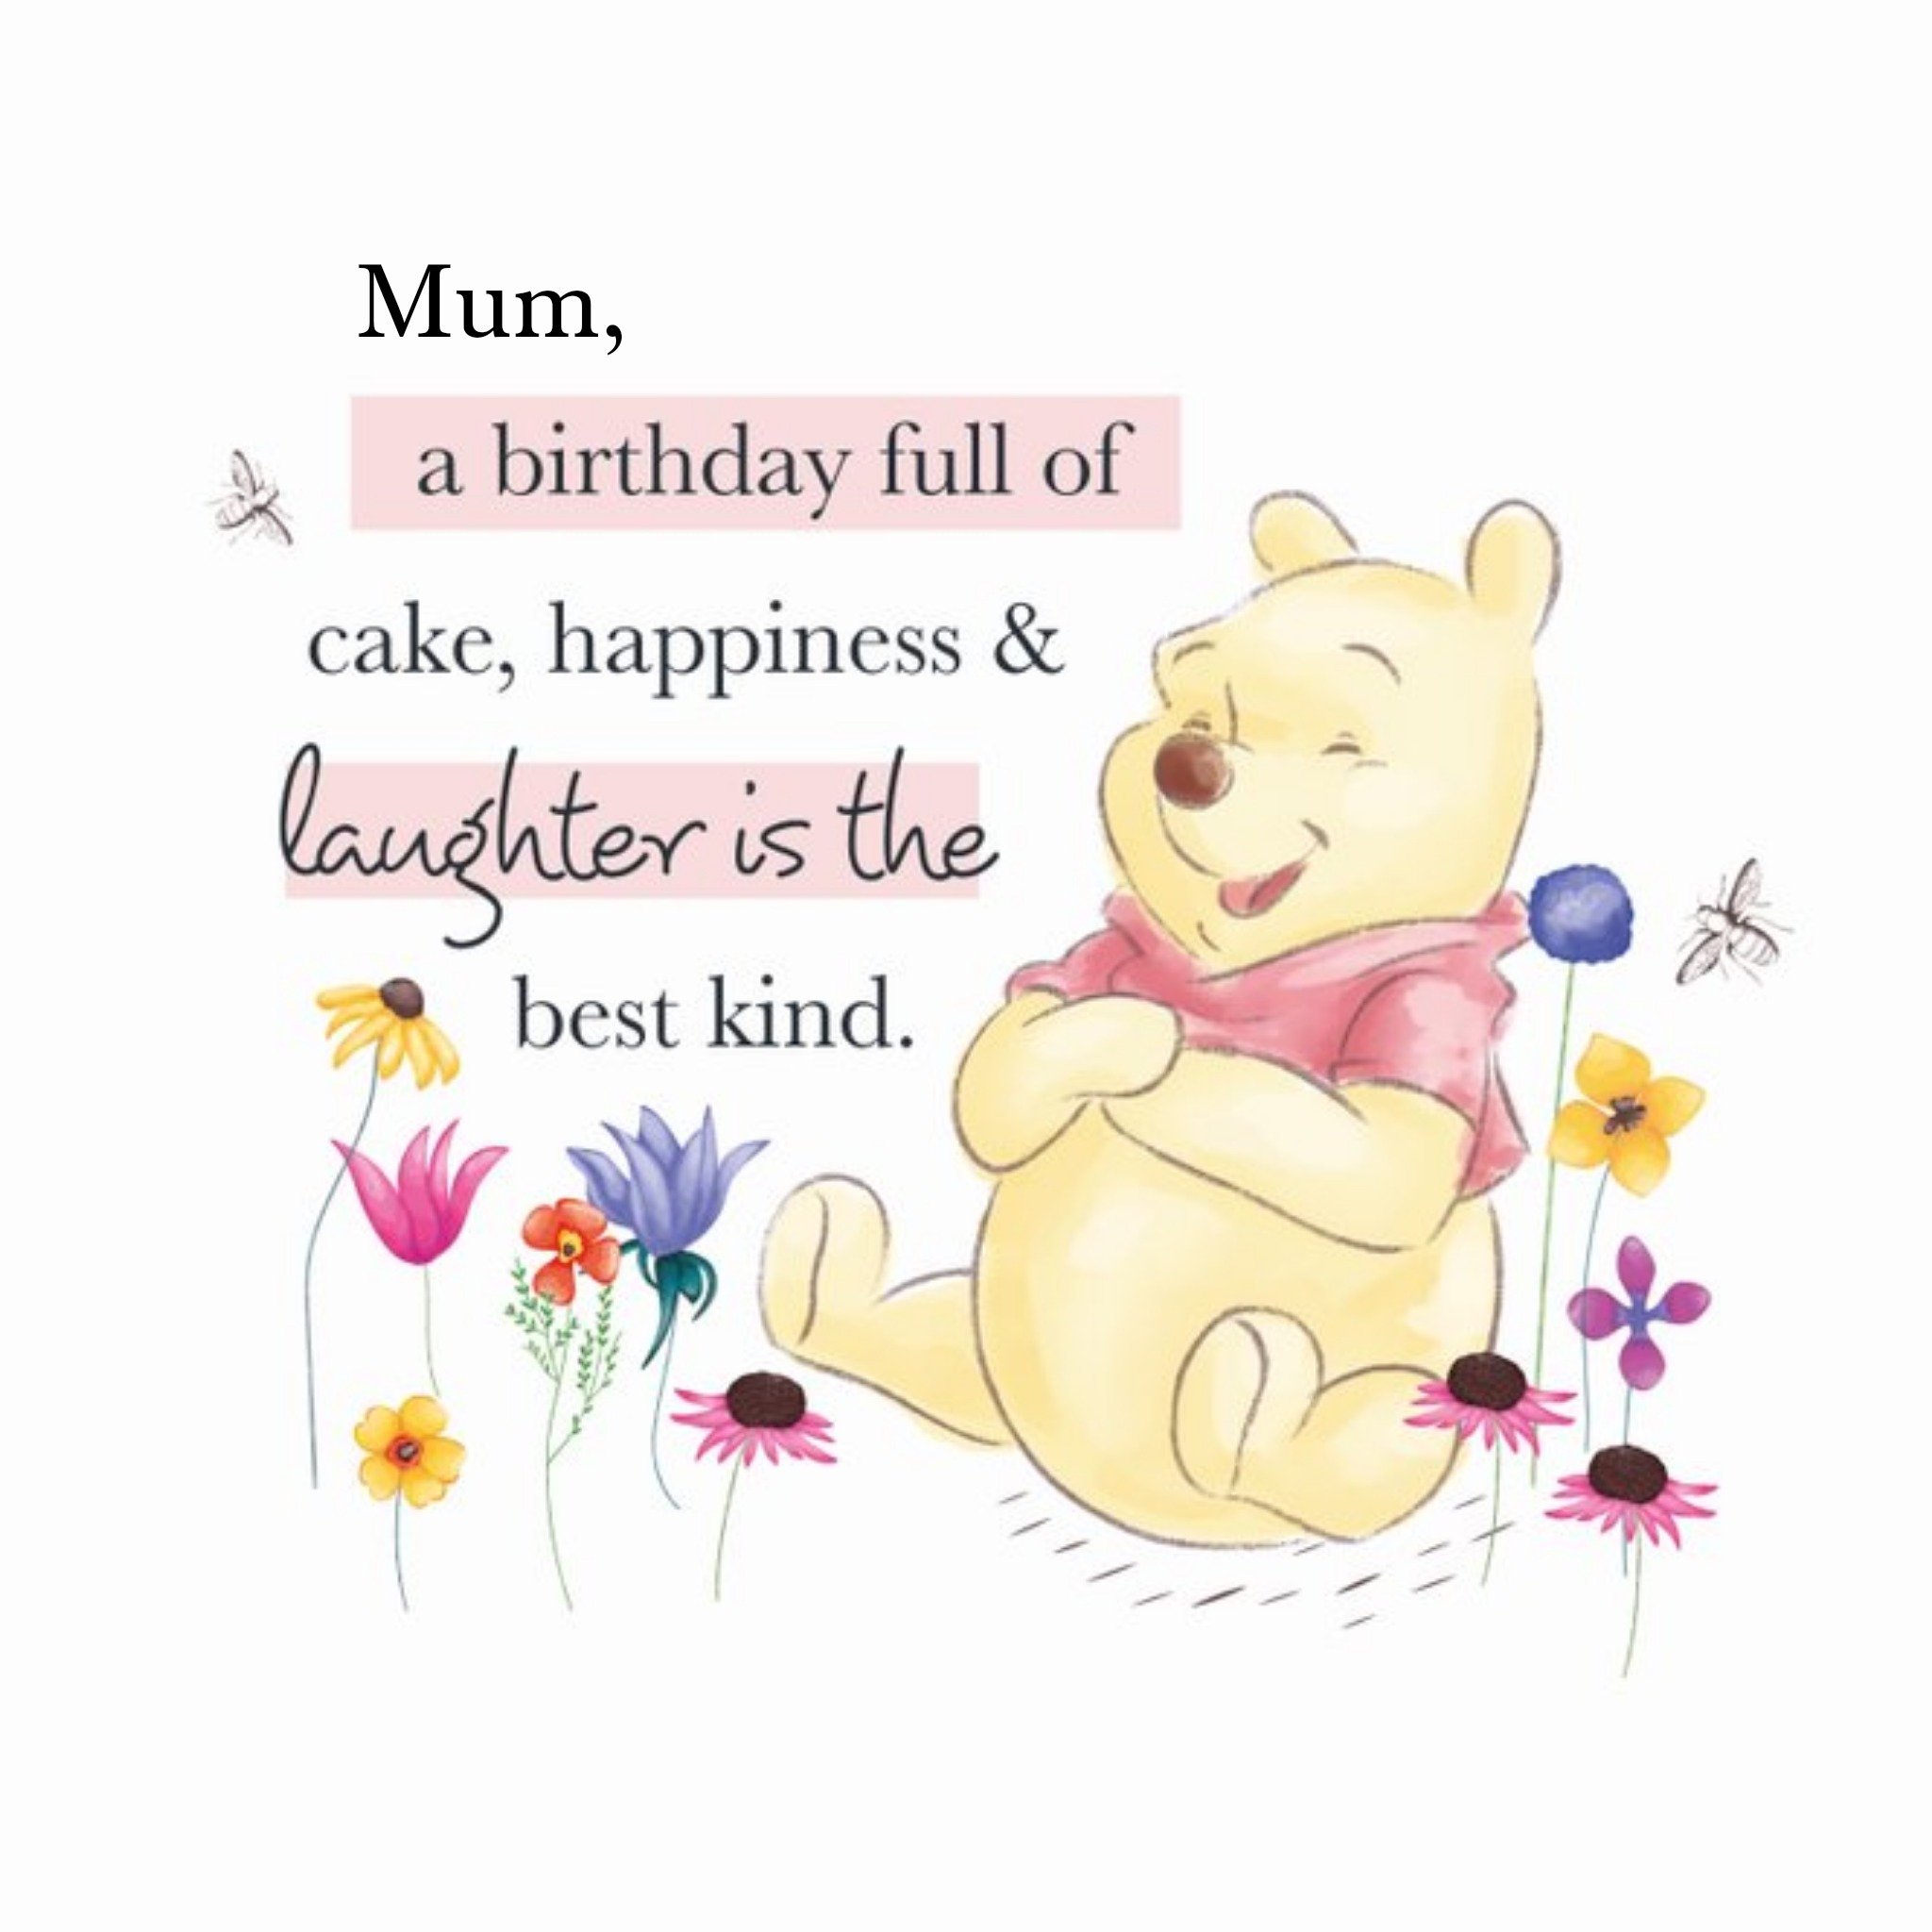 Winnie The Pooh Cake Happiness And Laughter Birthday Card For Mum, Square